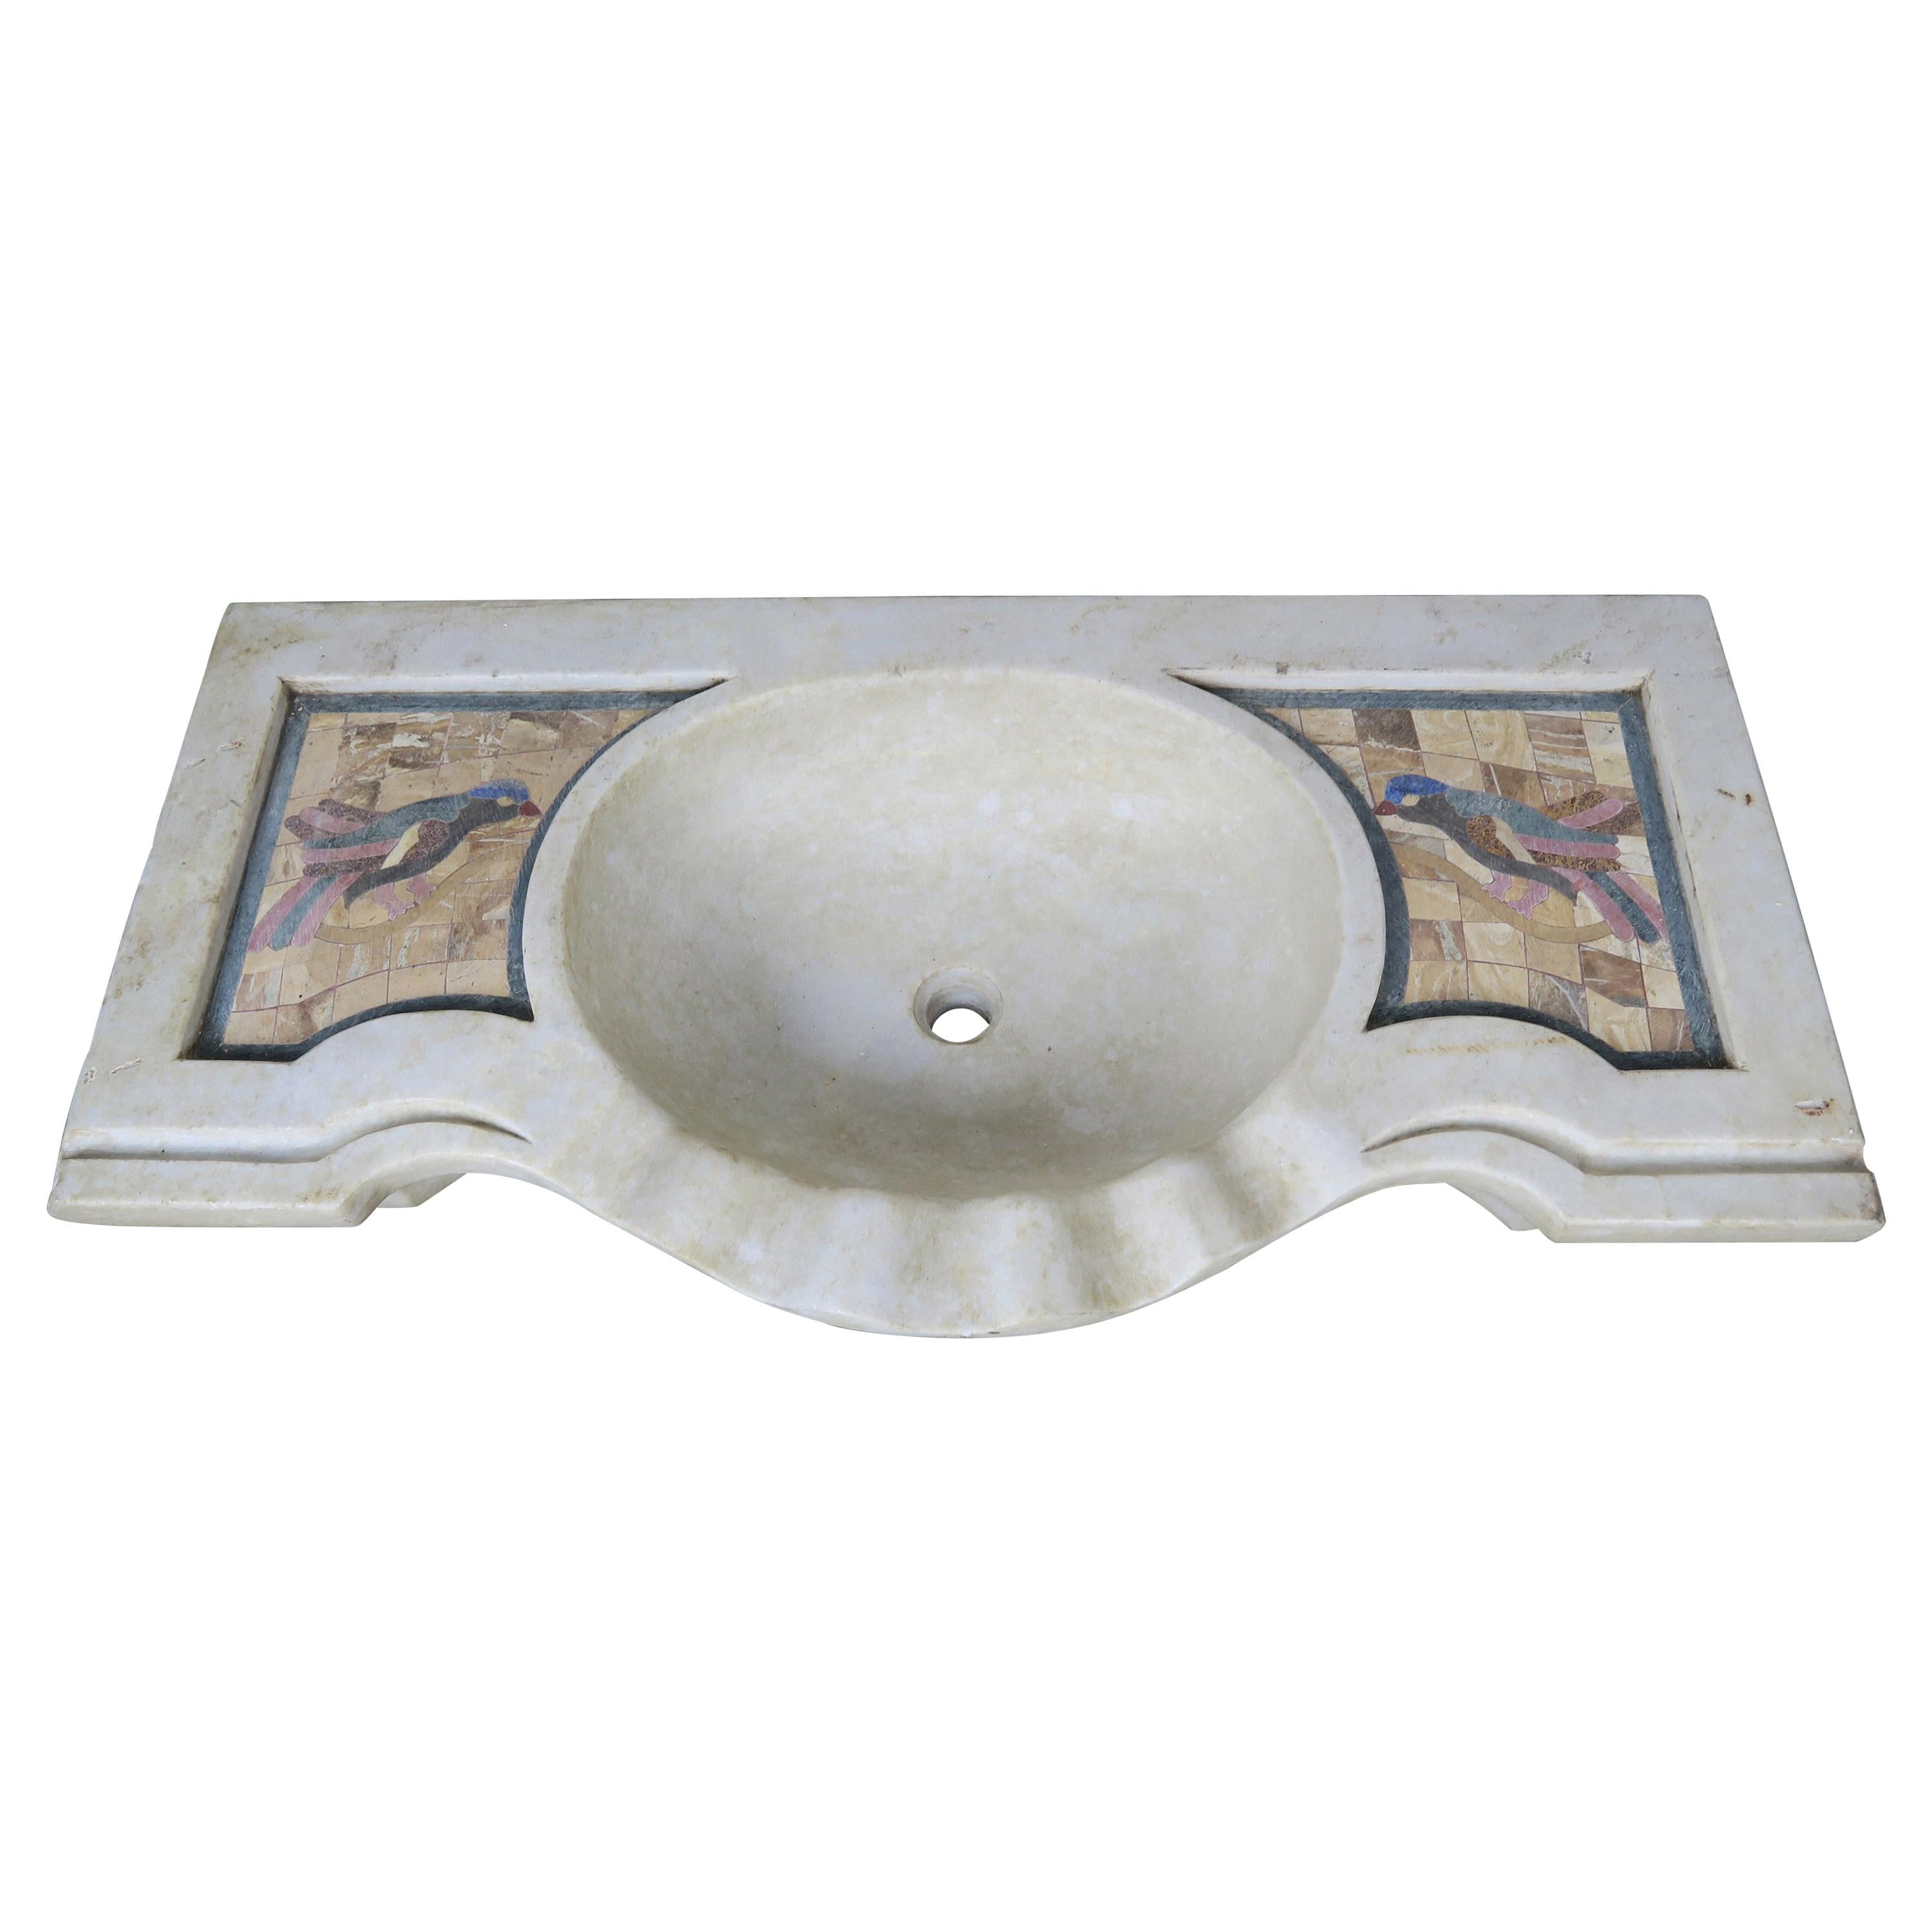 Carrara Marble Sink with Inlaid Stone Birds